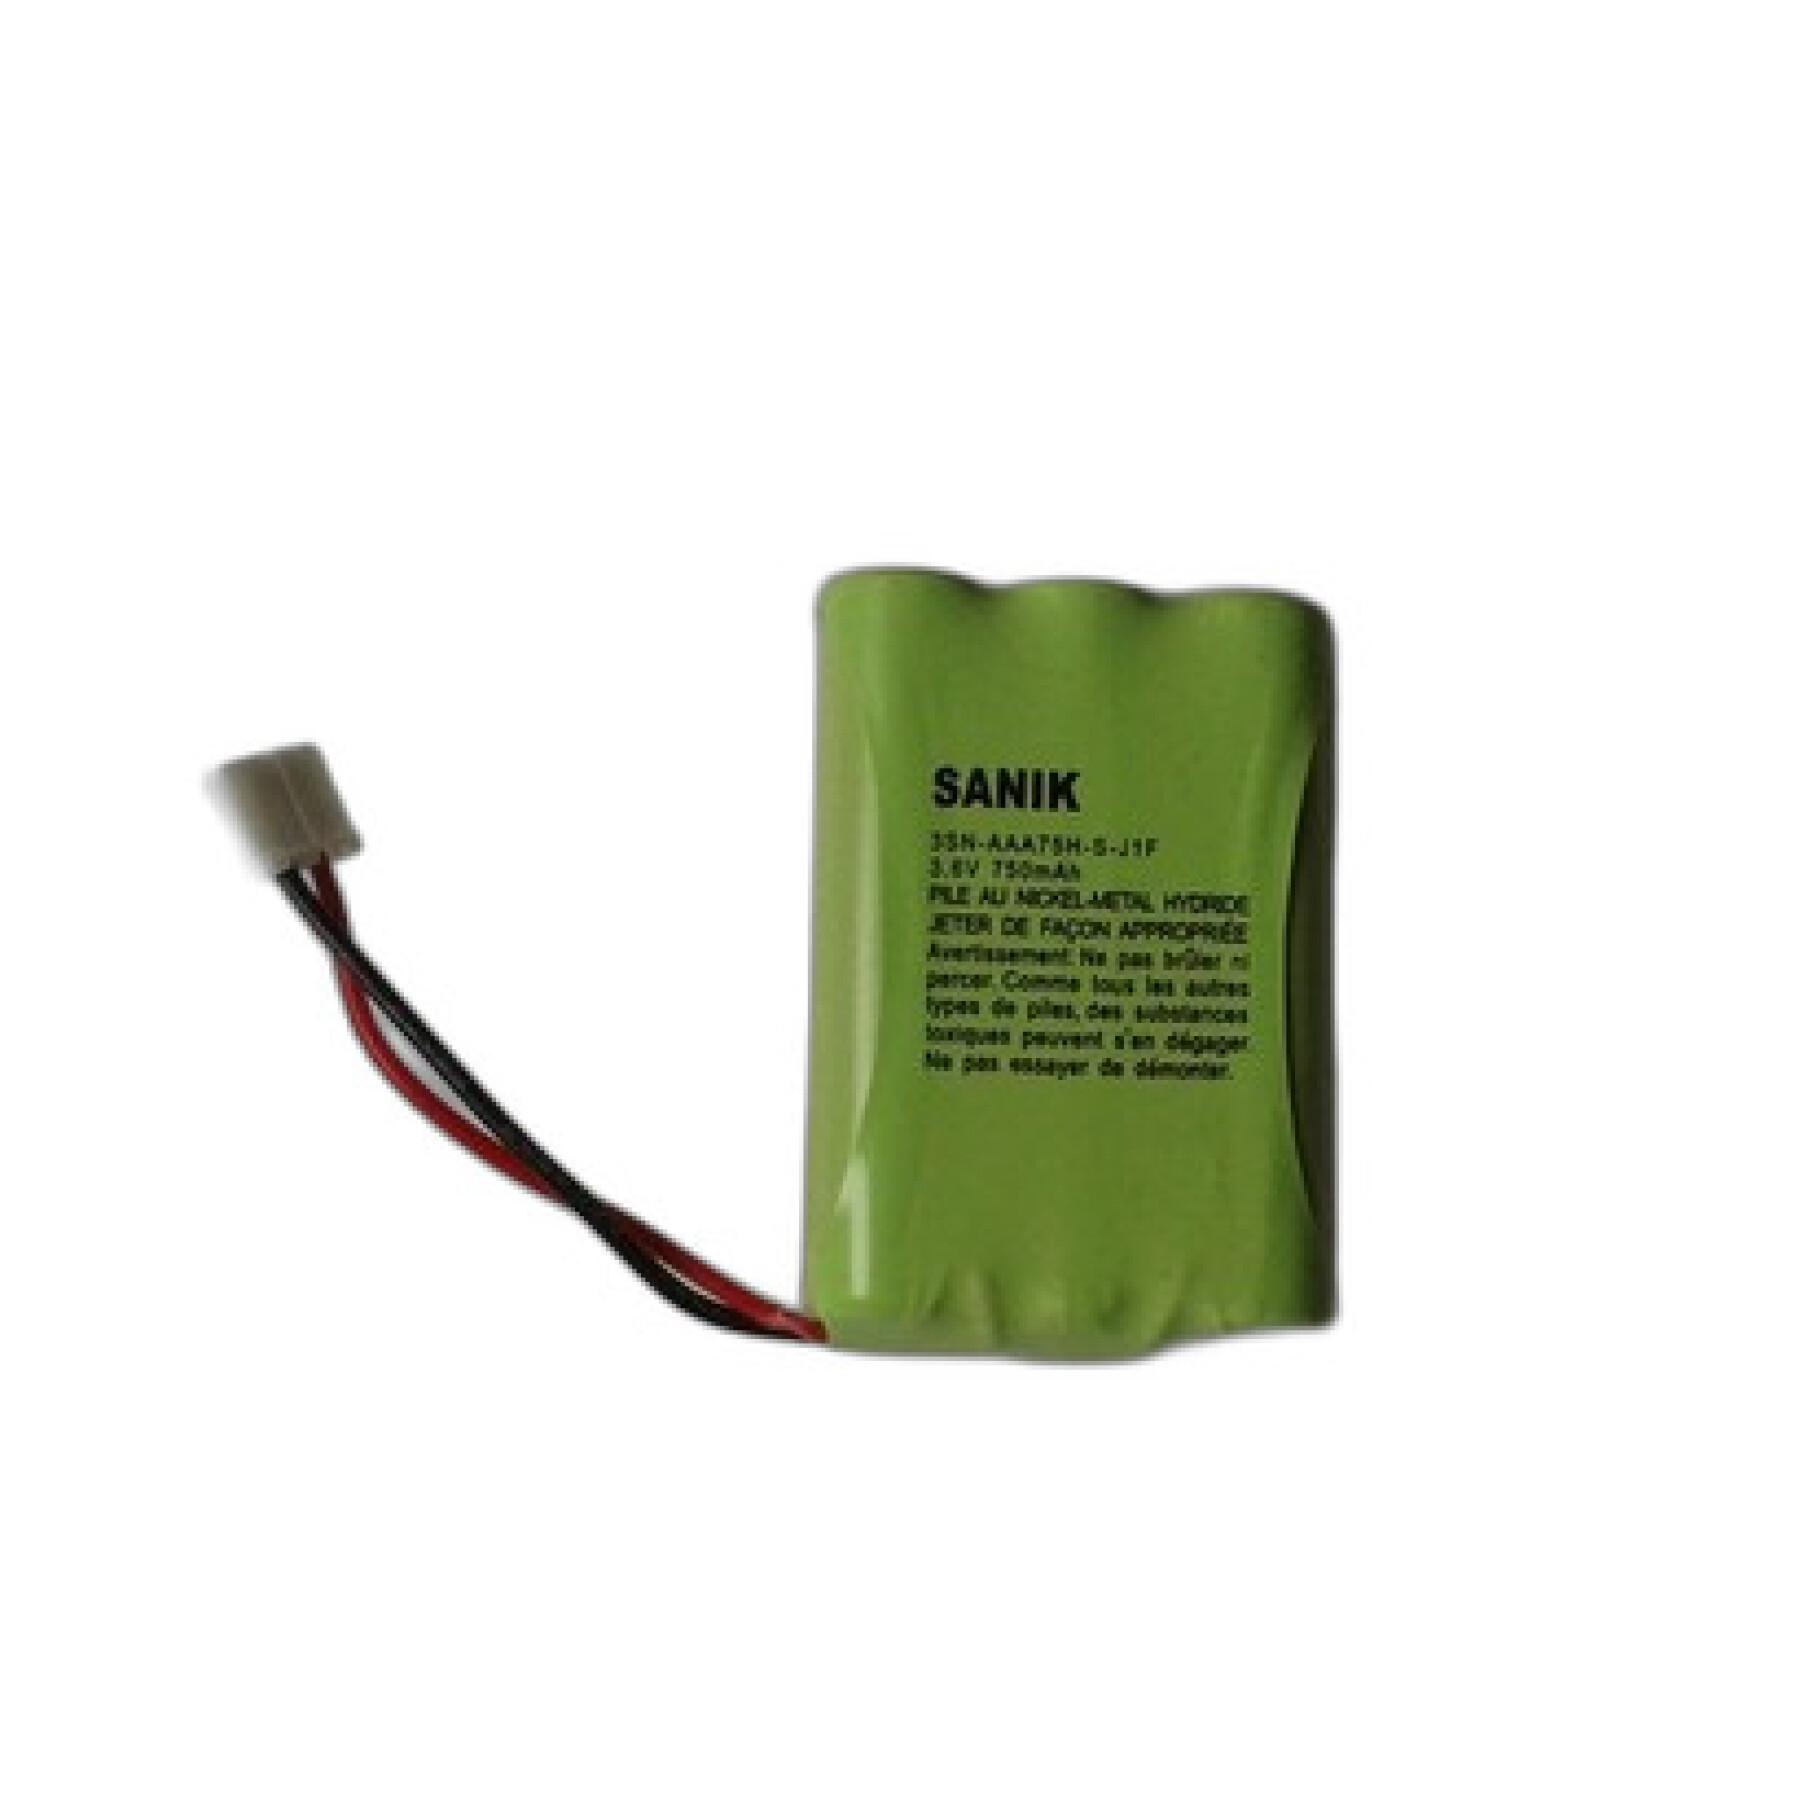 Spare battery for cordless handset - end of production Navicom RY650